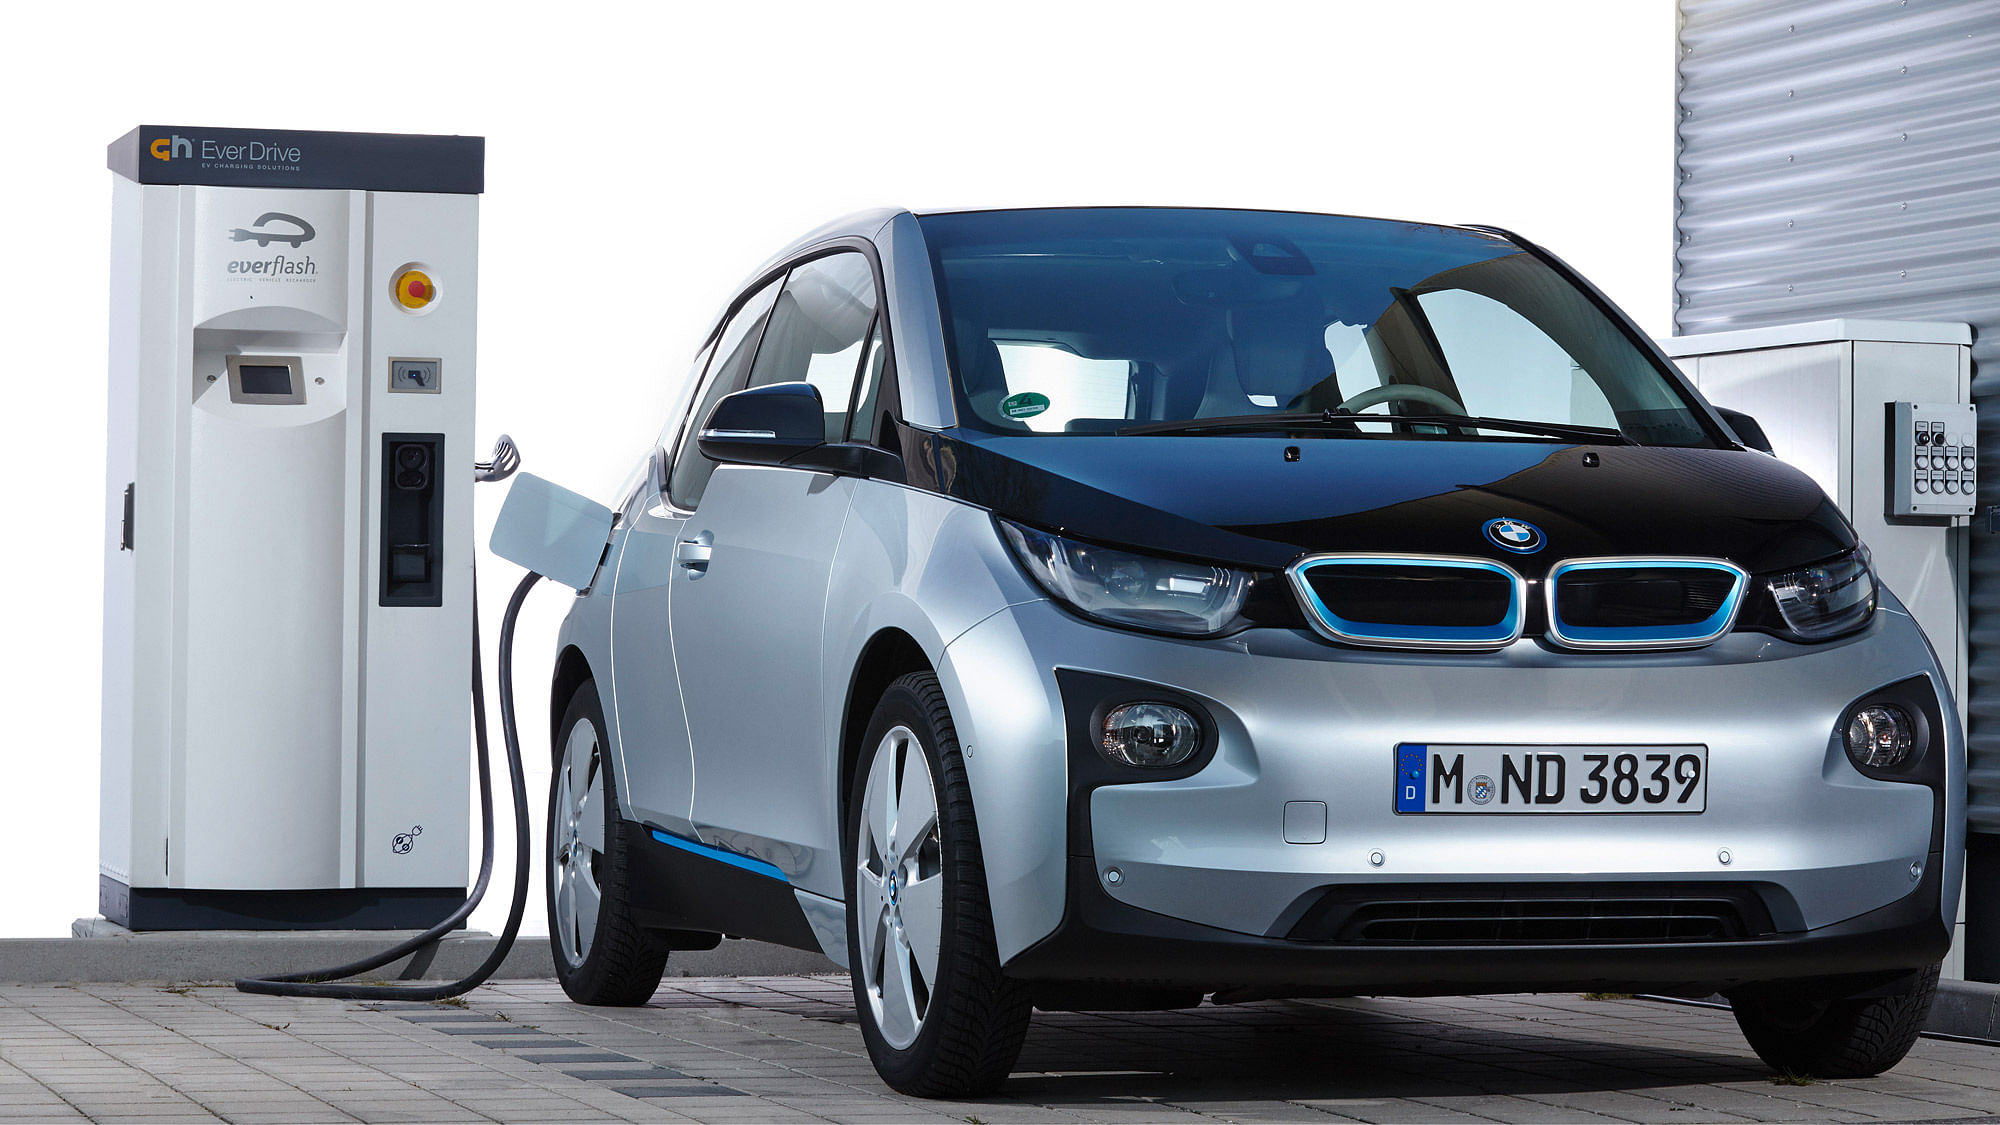 The BMW i3 is one of the most popular electric vehicles sold by the German automaker. (Photo: BMW)